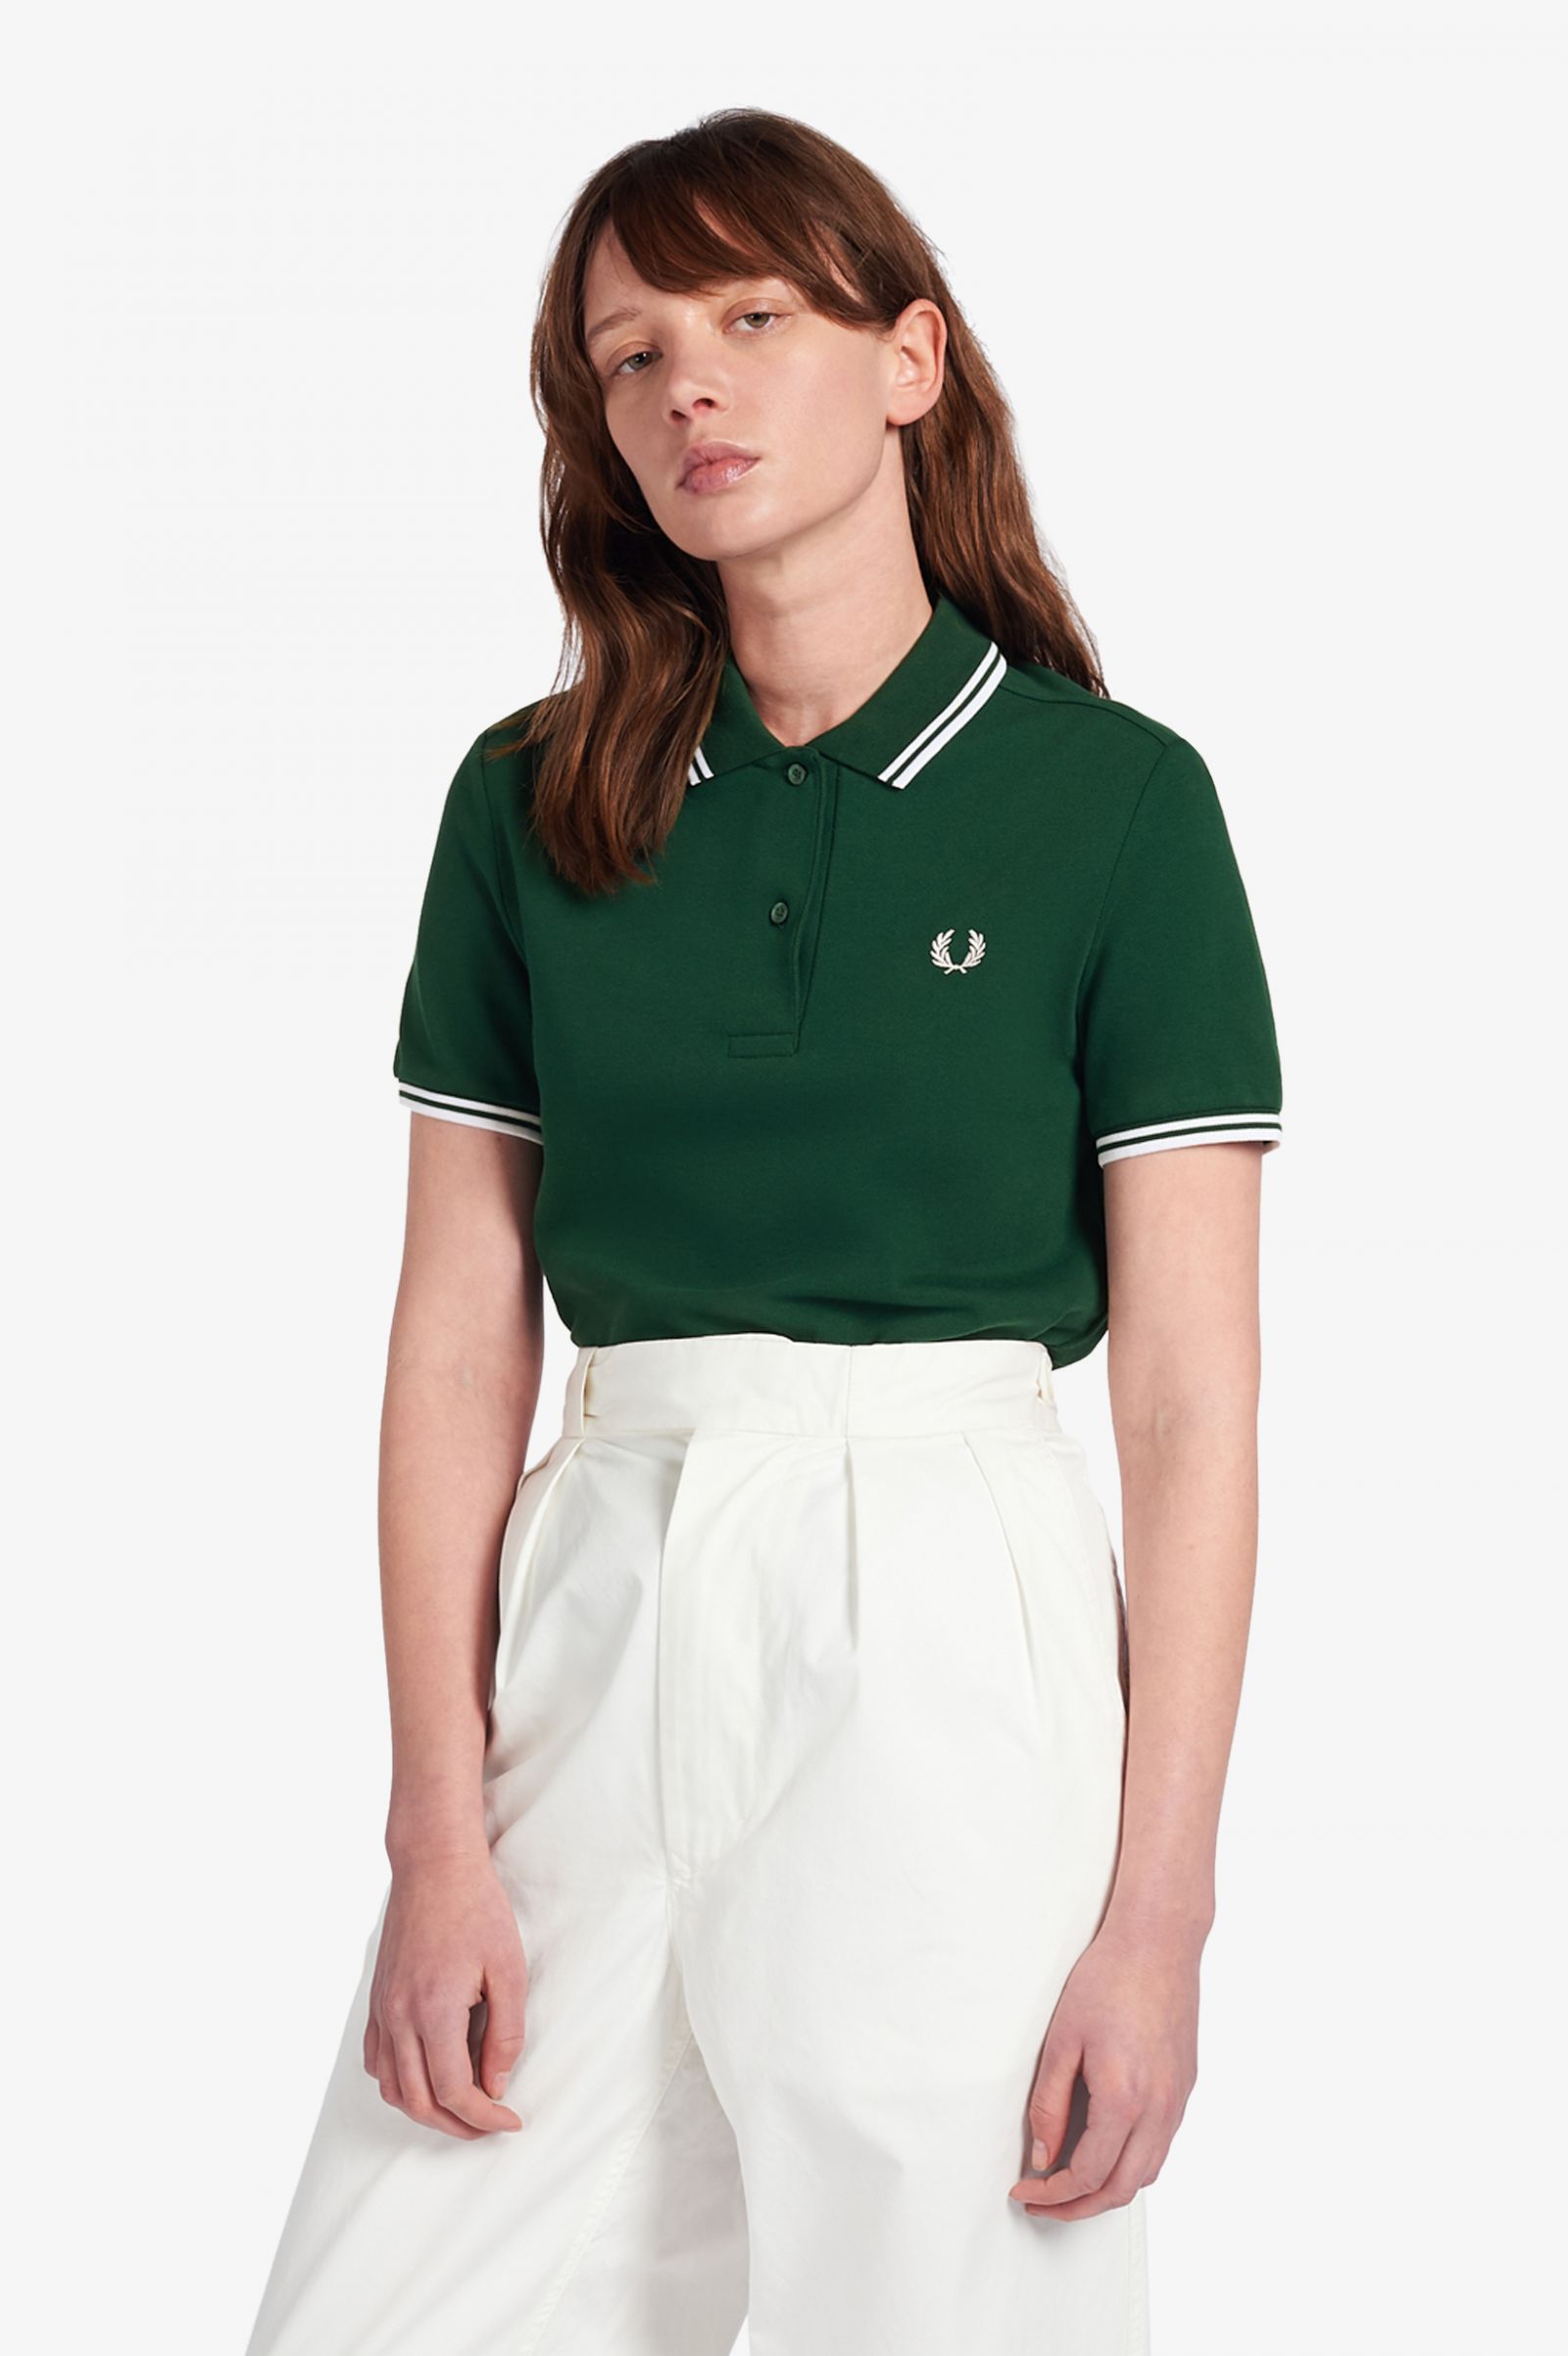 G Ivy White White The Fred Perry Shirt Women S Short Long Sleeve Shirts Fred